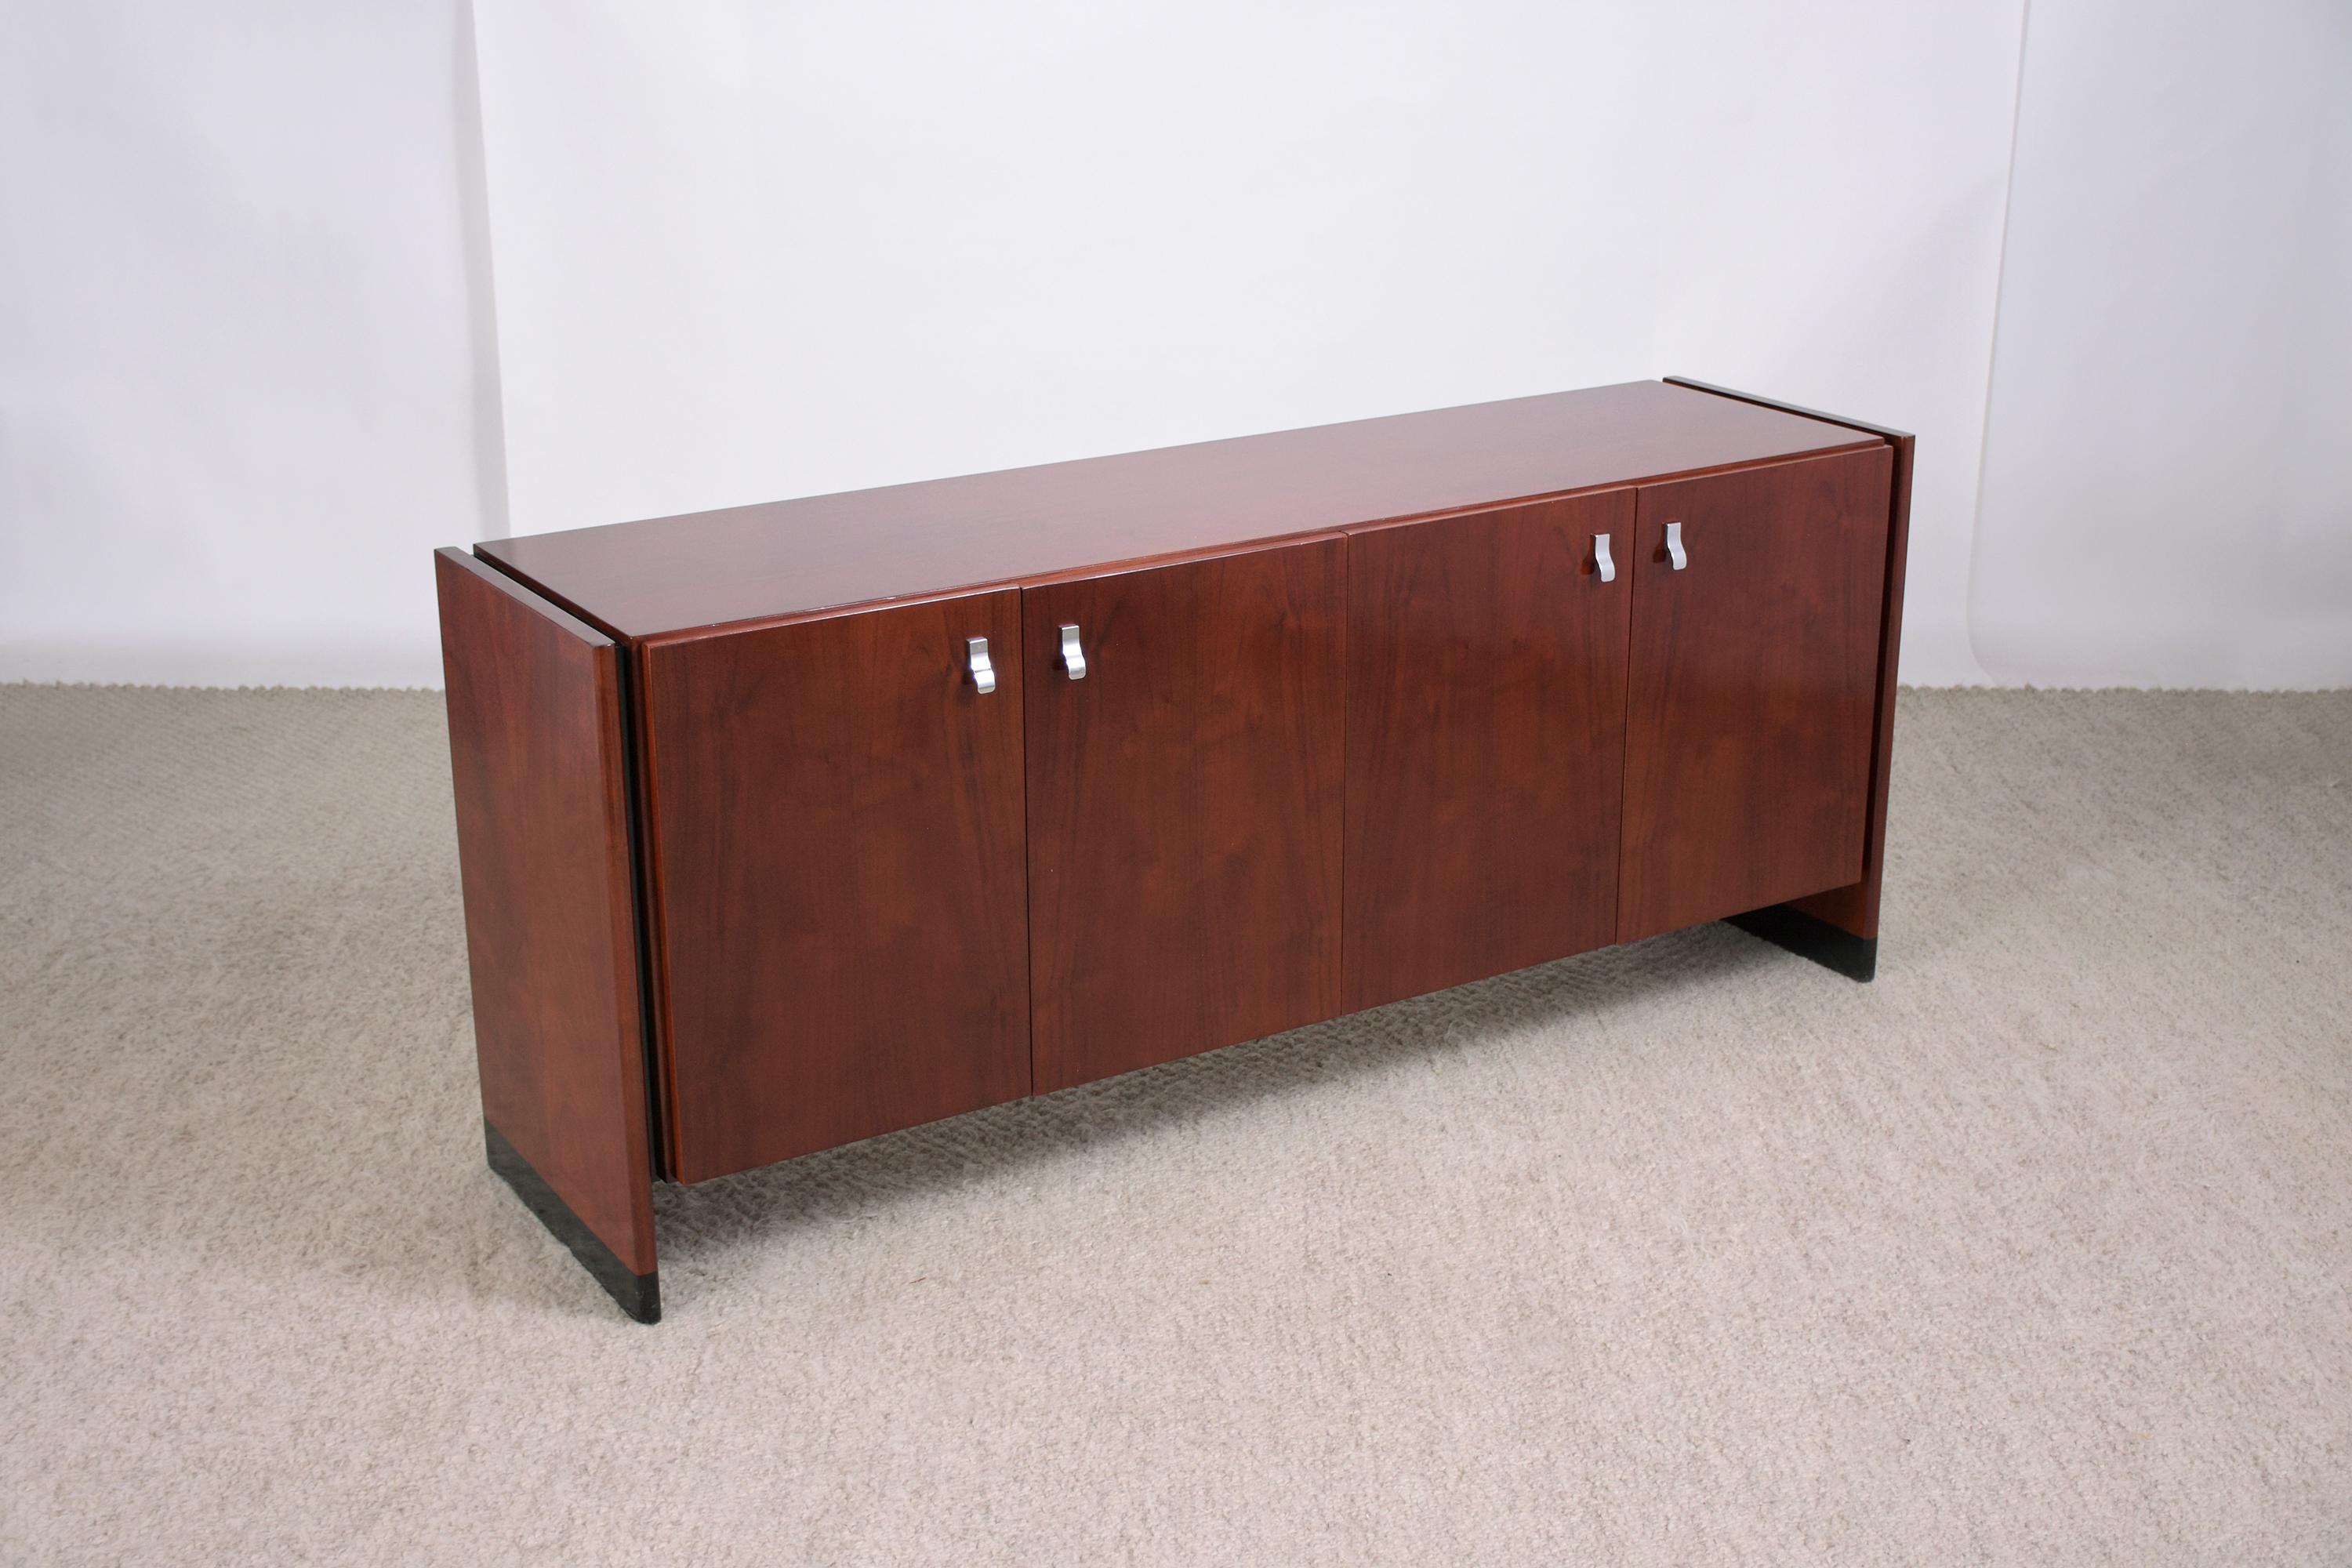 1960s Mahogany Mid-Century Modern Credenza with Chrome Accents 2